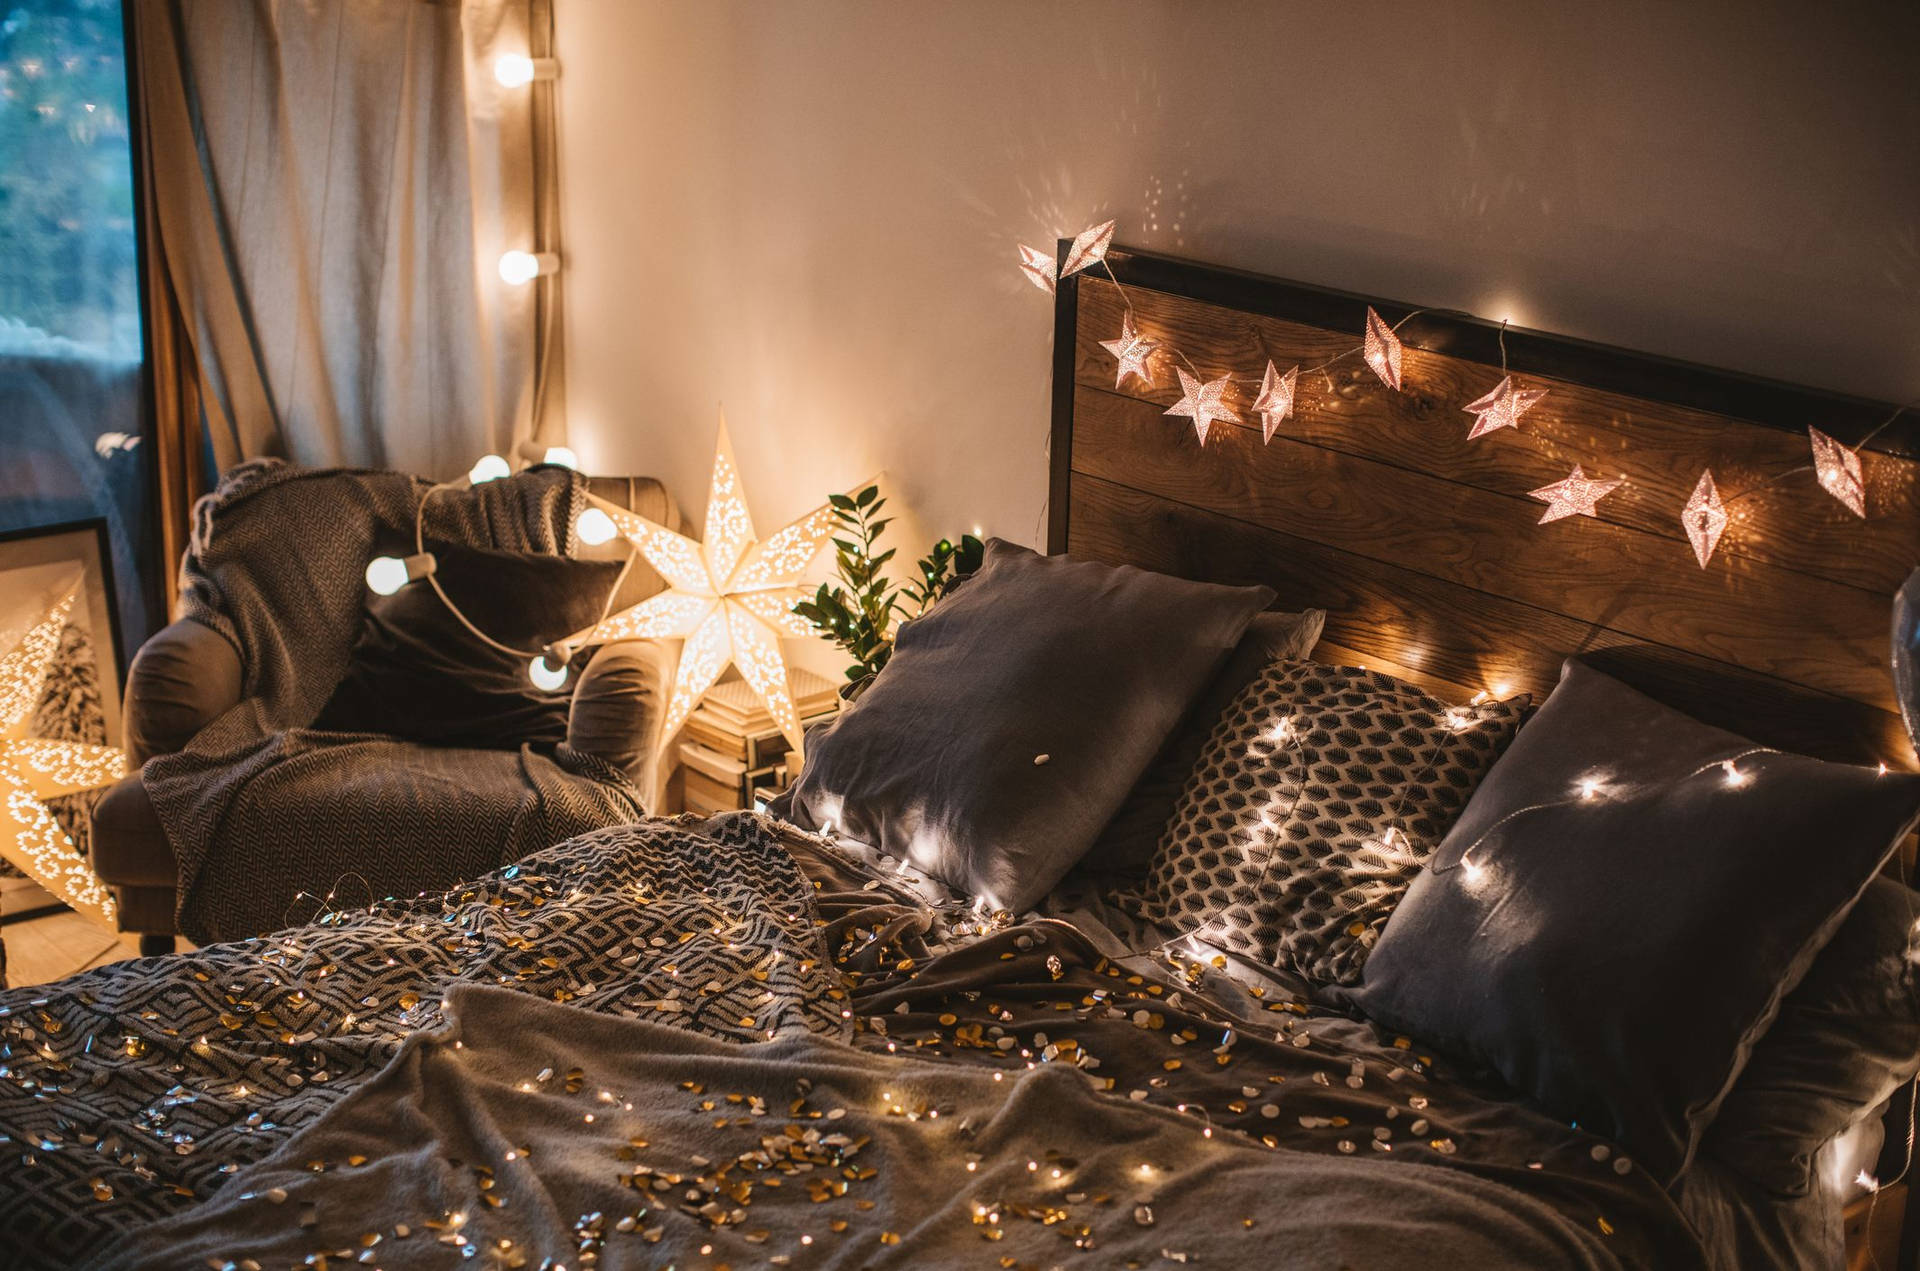 Free Fairy Lights Photos and Vectors